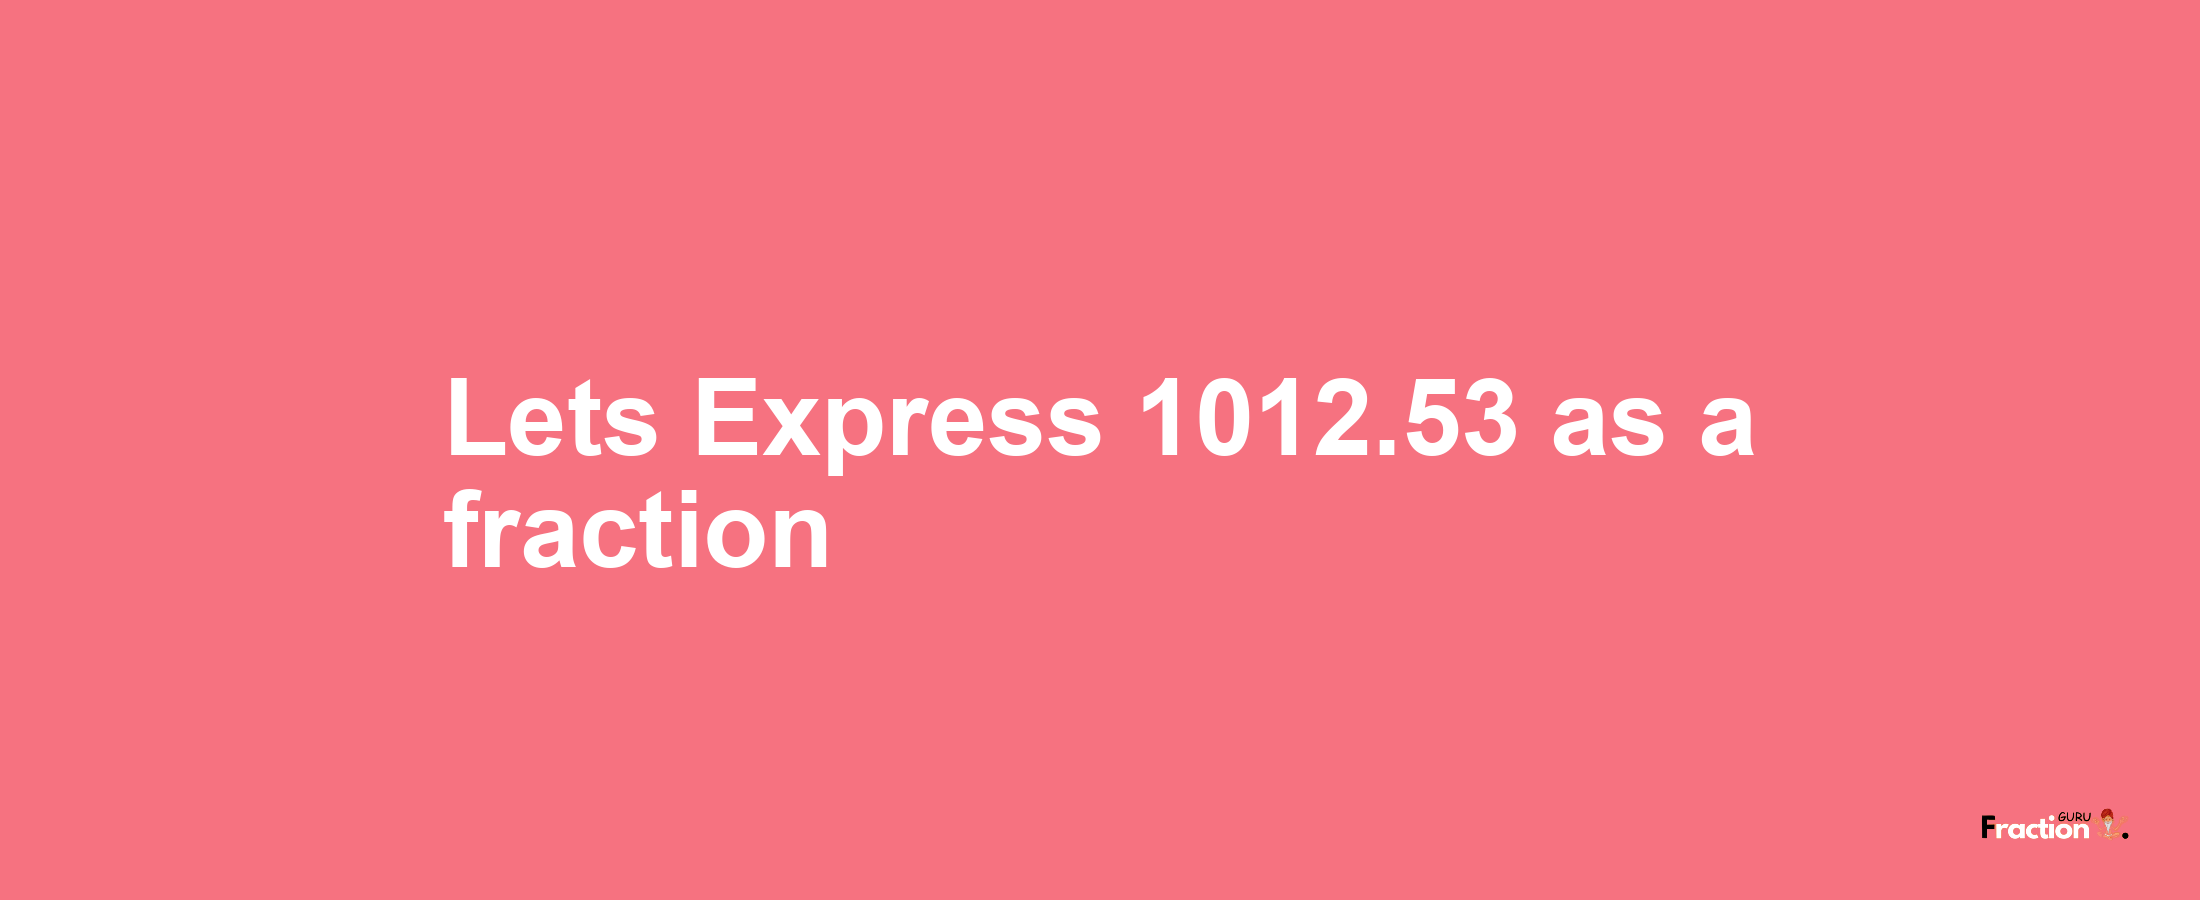 Lets Express 1012.53 as afraction